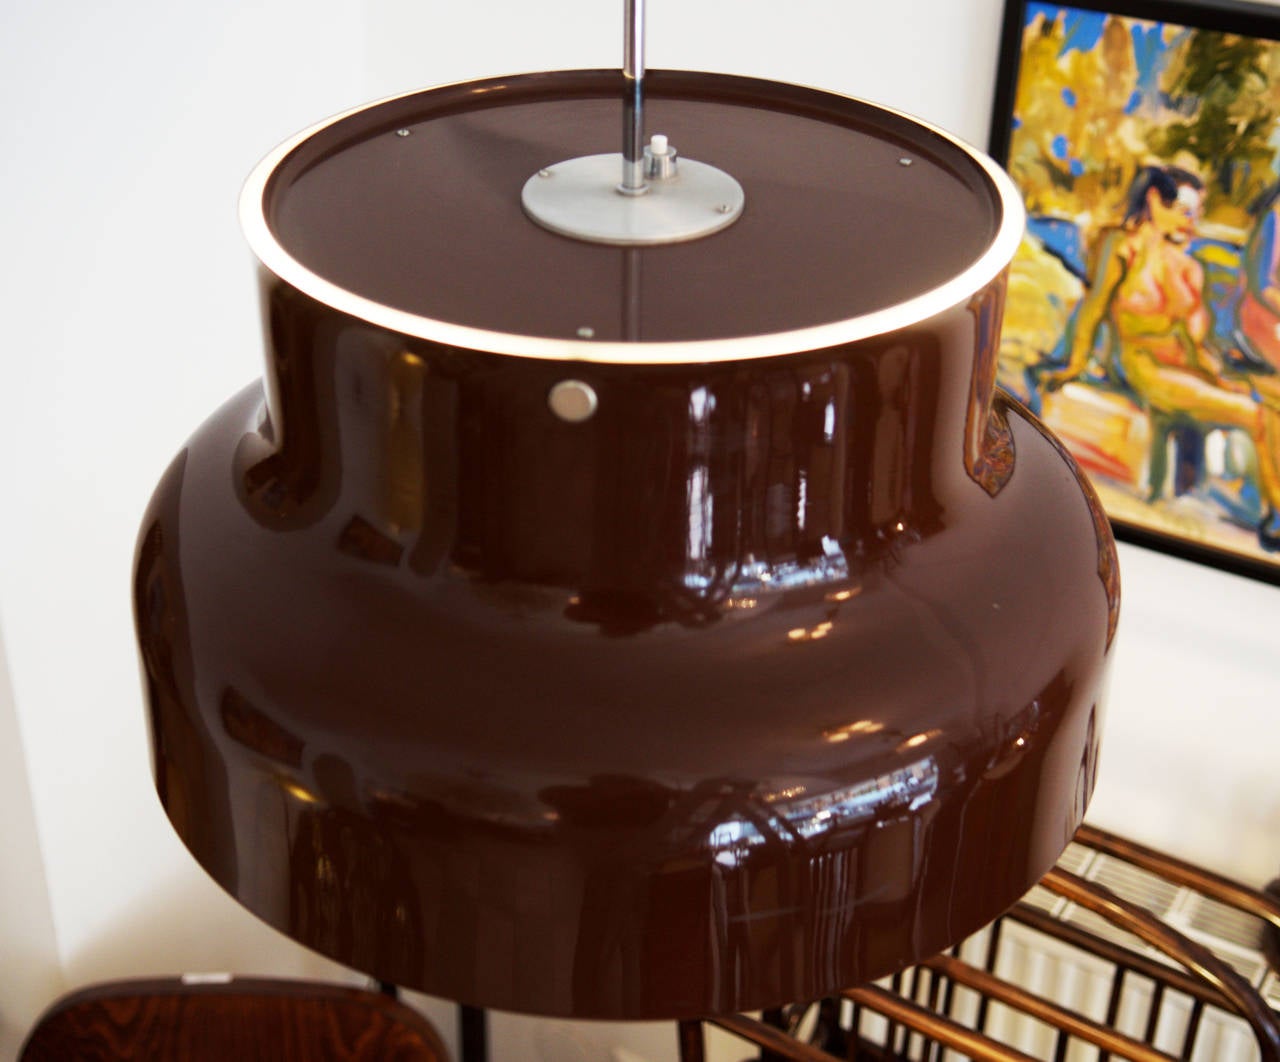 Beautifull "Bumling lamp" in brown designed in 1968. 
The lamp has a pressure switch can be either one or both shine annealing means. 
The diffuser also obtained the top Bumling generates an extremely uniform light.
Material:
laquered